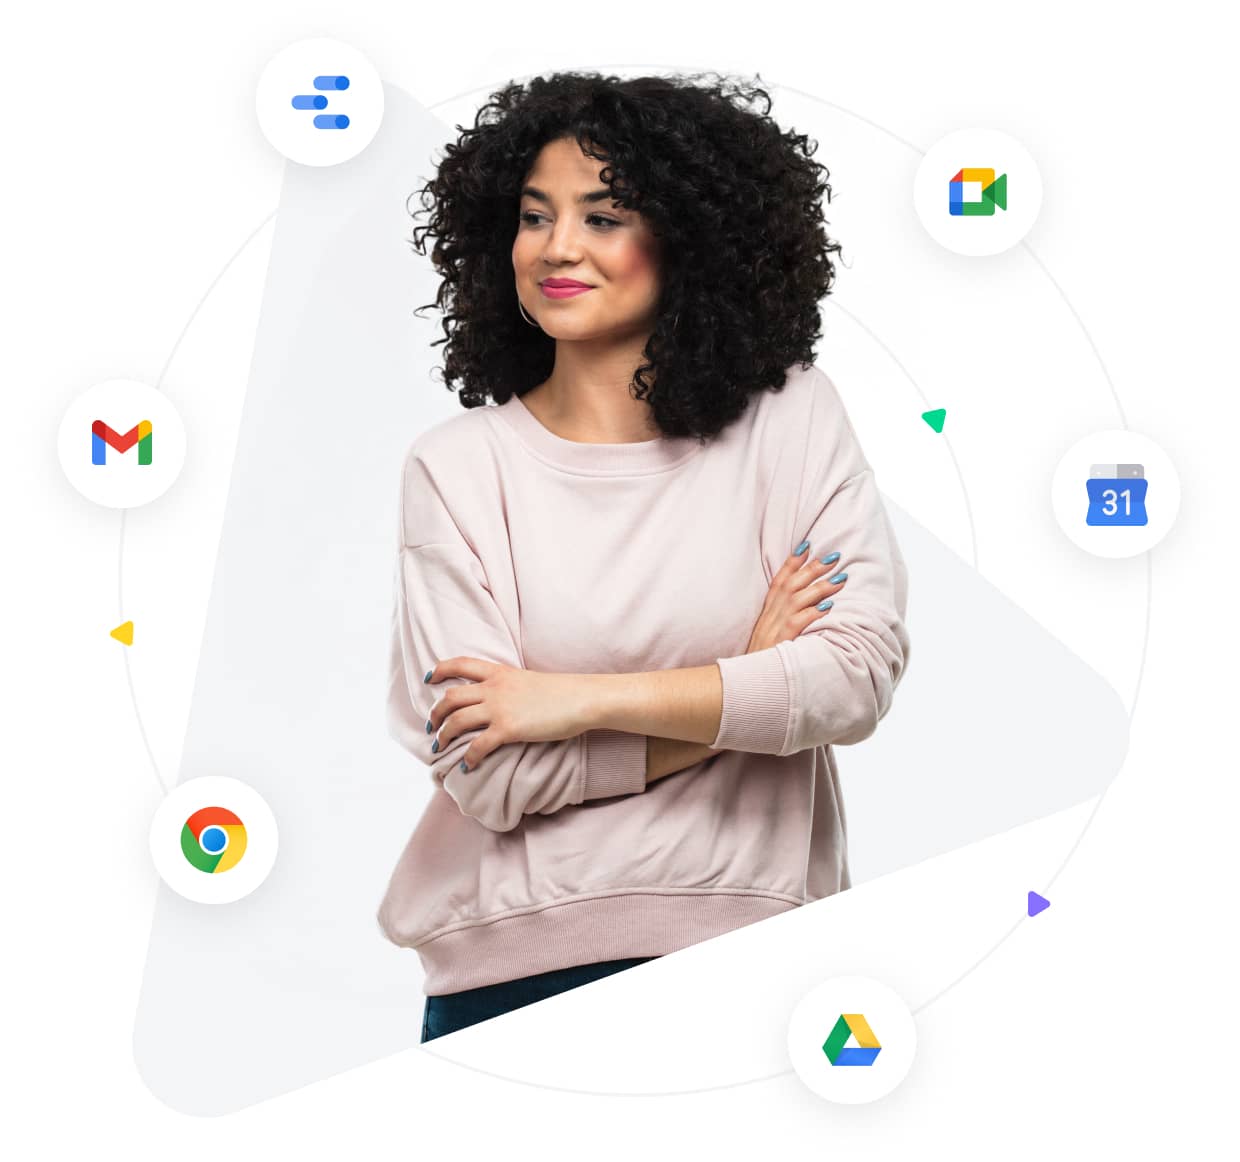 CRM for Google Workspace